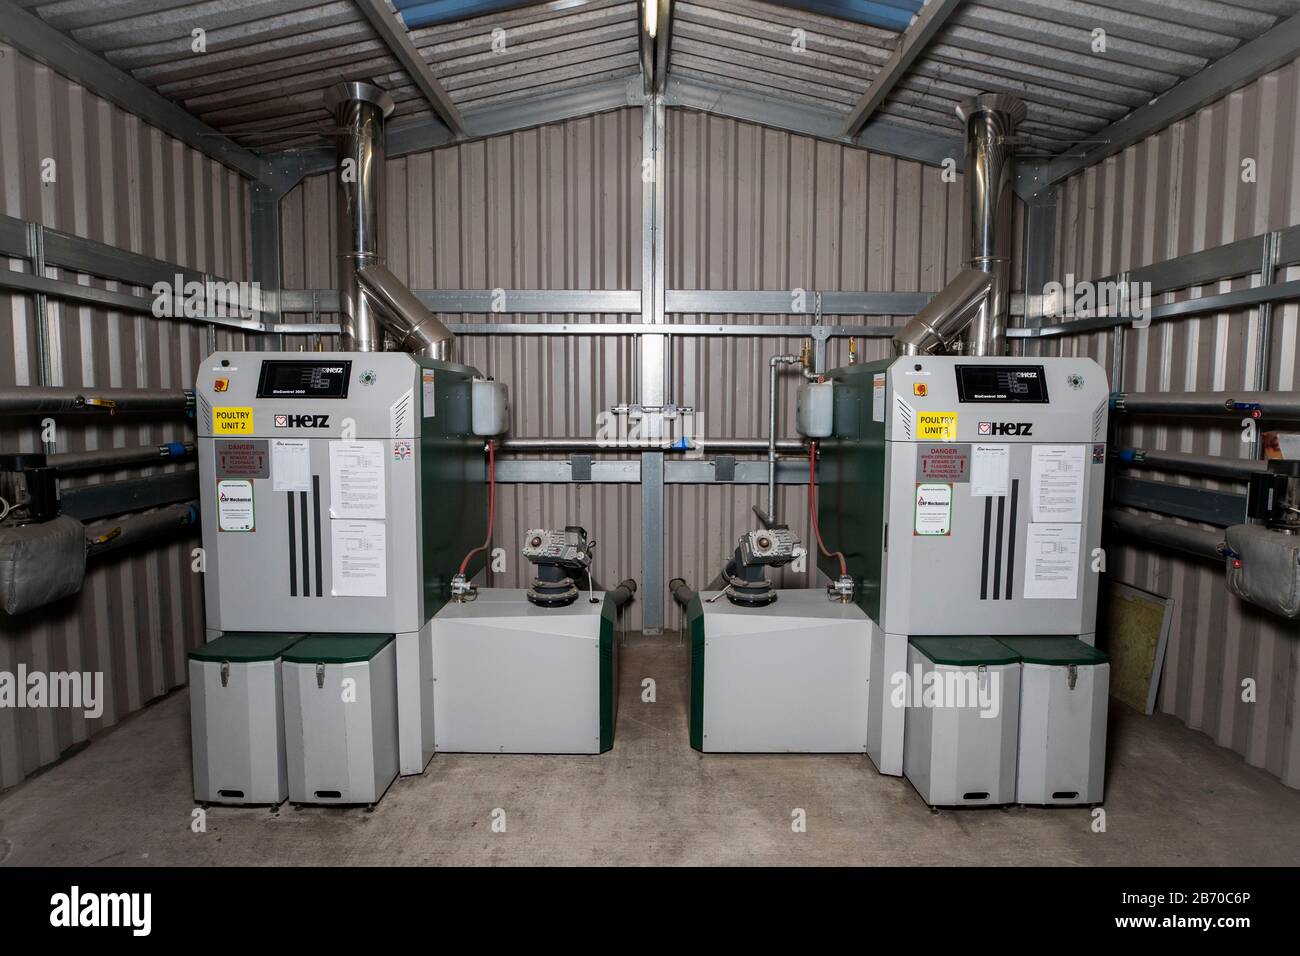 Two biomass boilers on a poultry farm outside of Moira, Co. Down, purchased by poultry farmer Ronnie Wells with the aid of the Northern Irish version of the Renewable Heat Incentive. A public inquiry into the Stormont government's botched handling of the scheme is due to publish its report tomorrow. Stock Photo